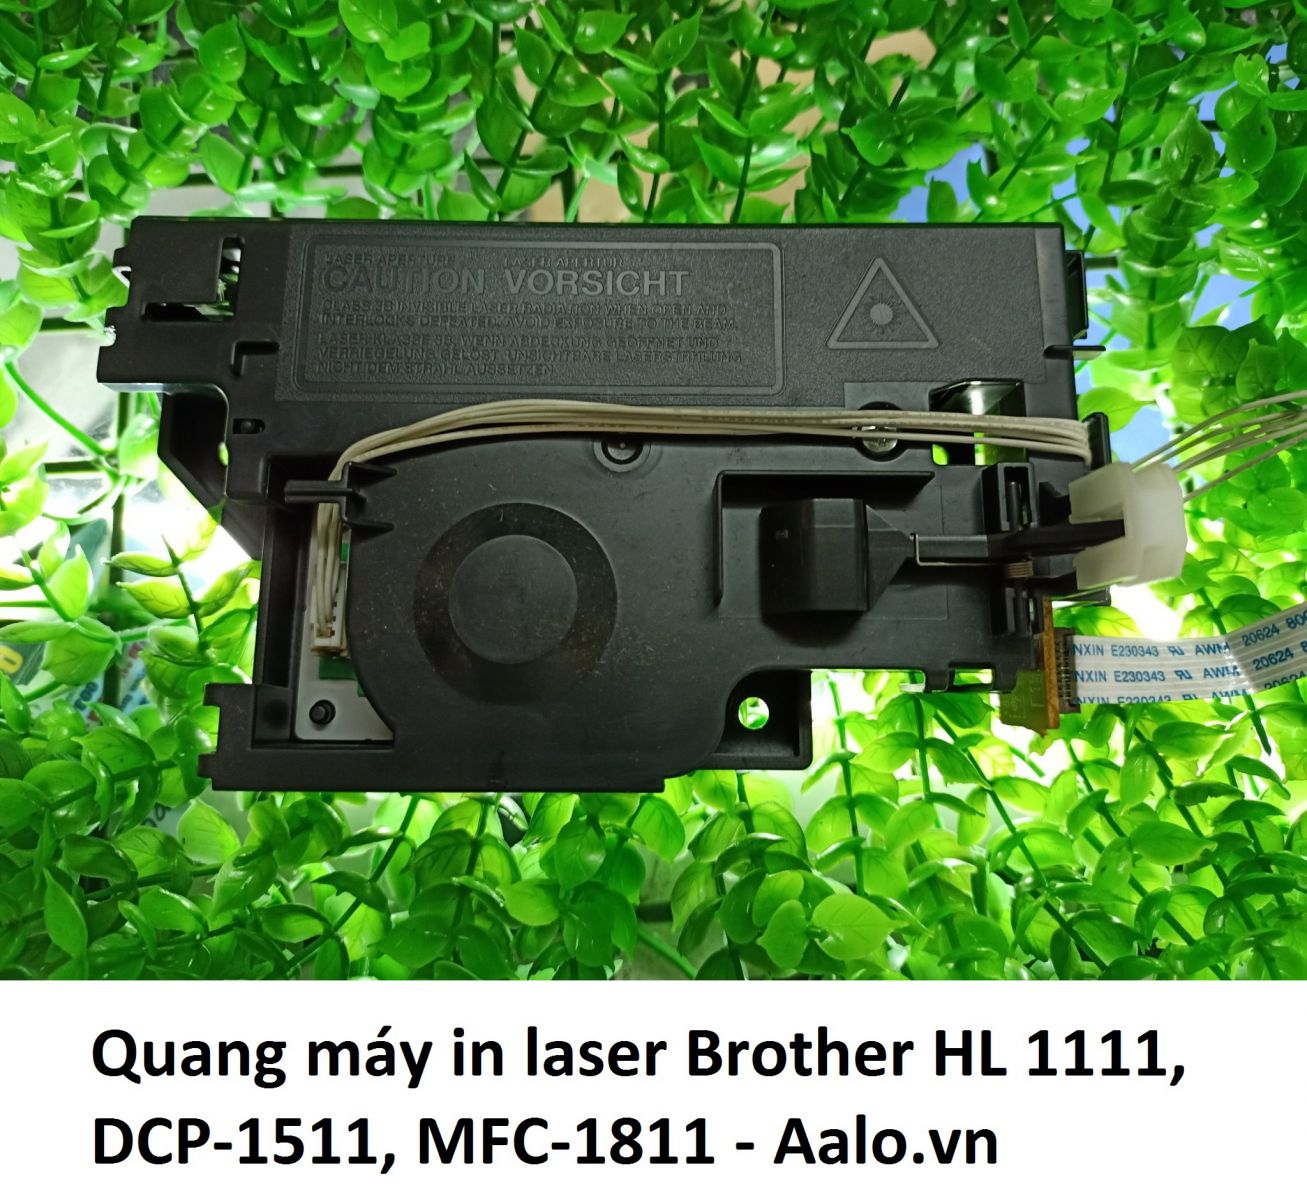 Quang máy in laser Brother HL 1111, DCP-1511, MFC-1811 - Aalo.vn